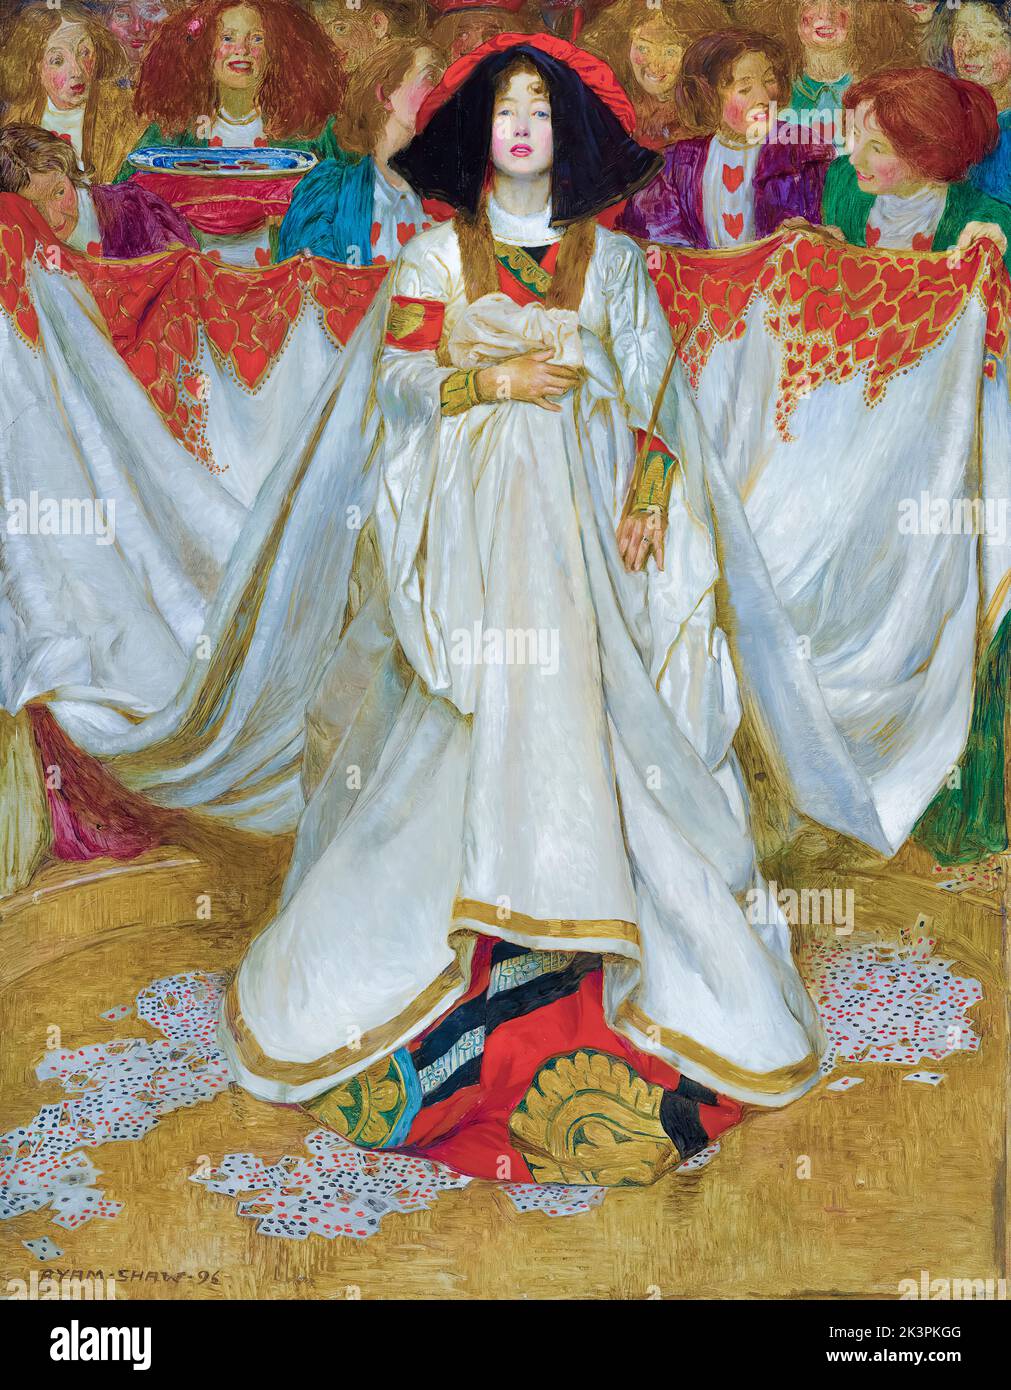 The Queen of Hearts, painting in oil on canvas by Byam Shaw, 1896 Stock Photo